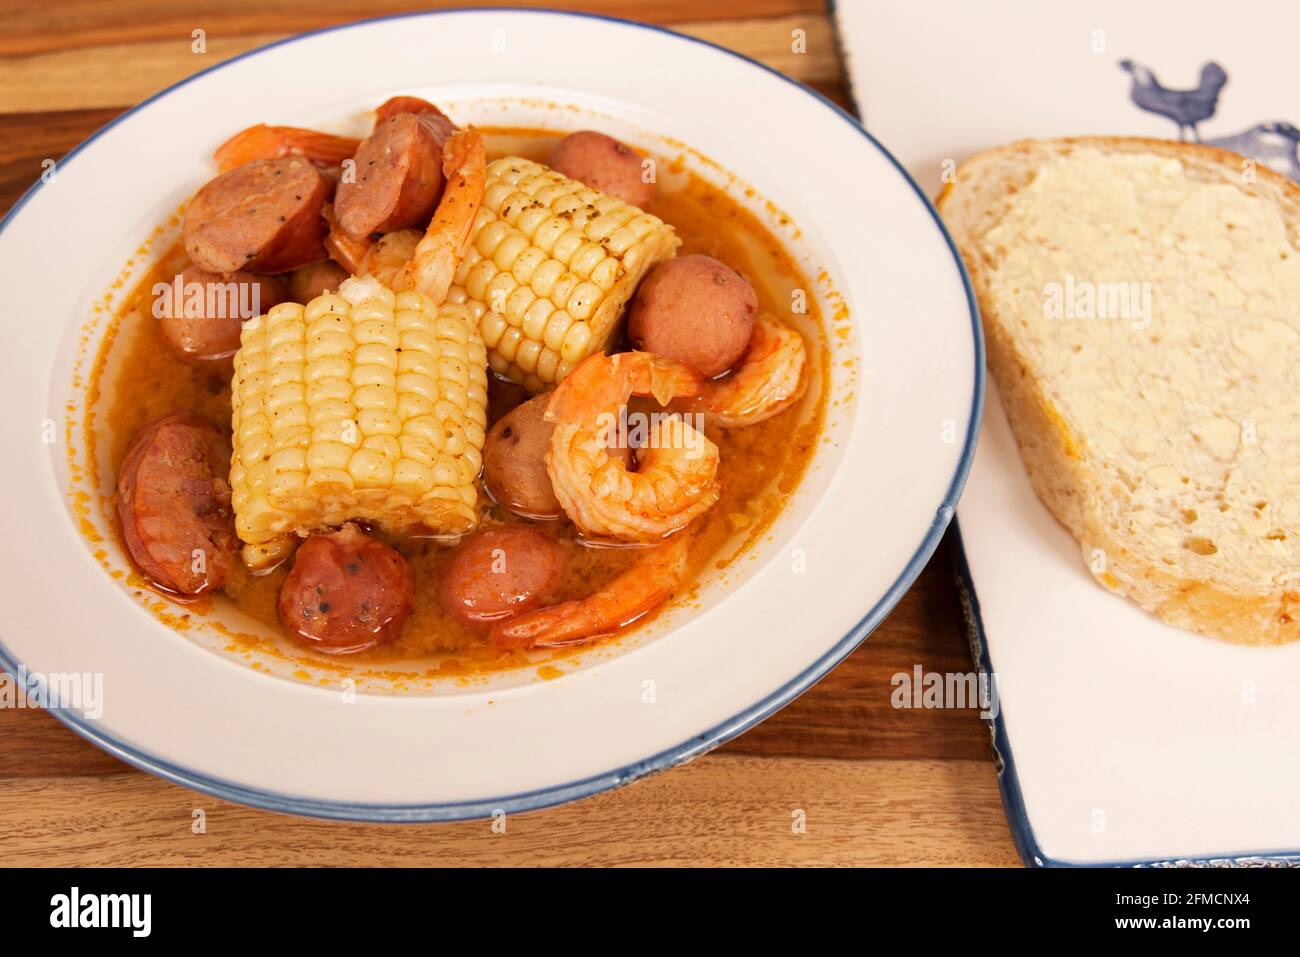 Homemade Cajun Shrimp Boil with corn, new potatoes, and andouille sausage with a slice of sourdough bread, served in a white bowl Stock Photo